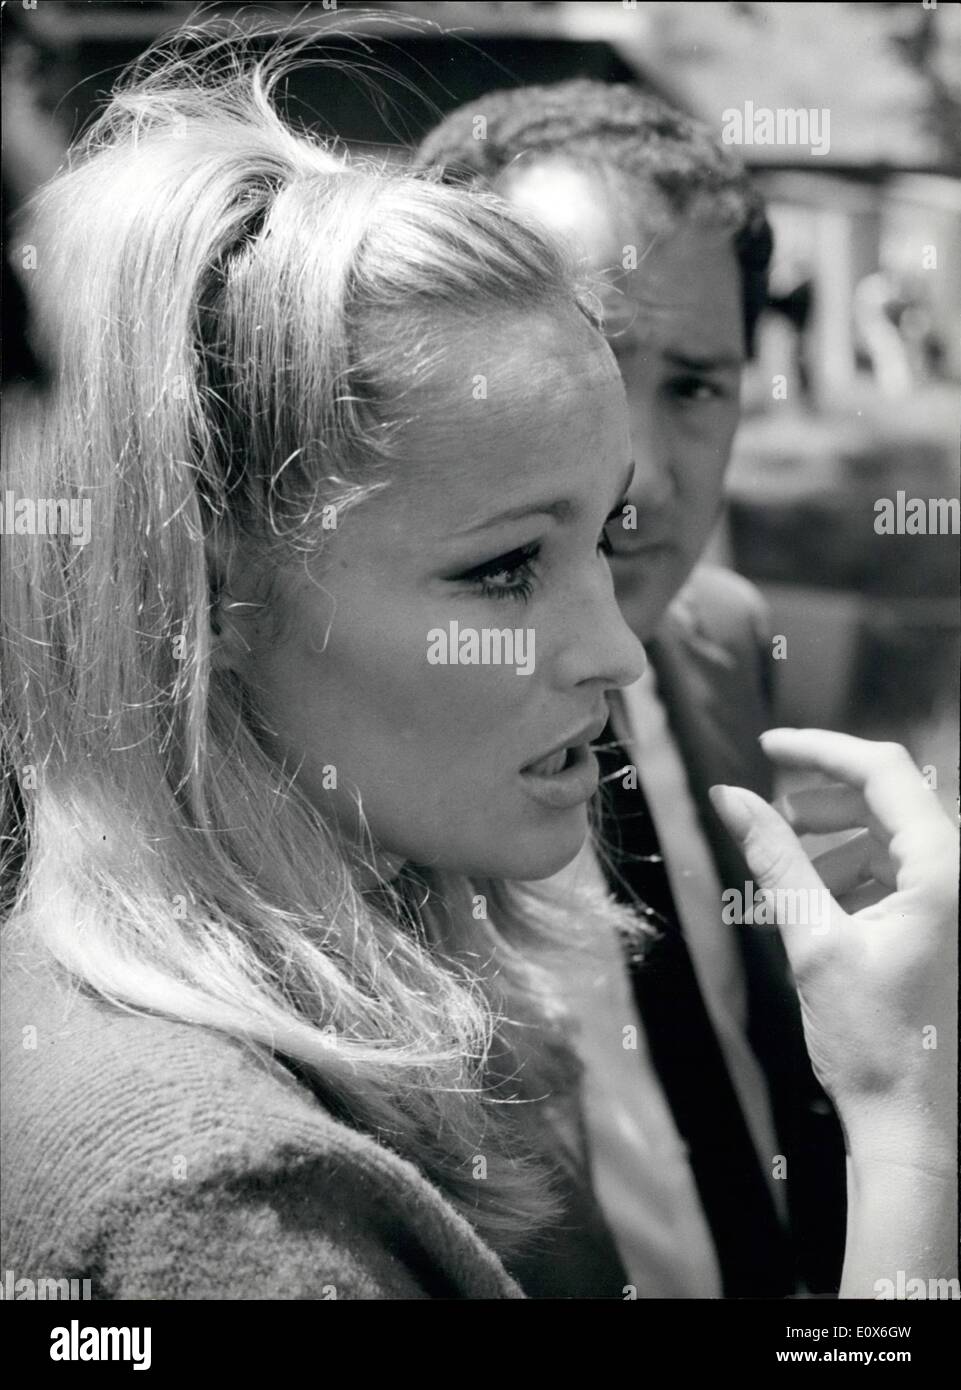 May 05, 1965 - In one of the most exciting star combinations of the year, Sospeh Levine has teamed Marcallo Mastroianni and Ursula Andress to ''The 7th Victim'' a new comedy thriller to be filmed on locations in Rome and New York. In ''the 7th Victim'' based on Robert Sheckley's popular science fiction novel, Mastroianni finds himself in hot pursuit by a murder minded Miss Andress, out to earn her diploma in legal homicides from the central world government, circa 200 A.D when she finds her target is the lovable Latin with his own ''License to Kill'' the romantic runabout begins Stock Photo